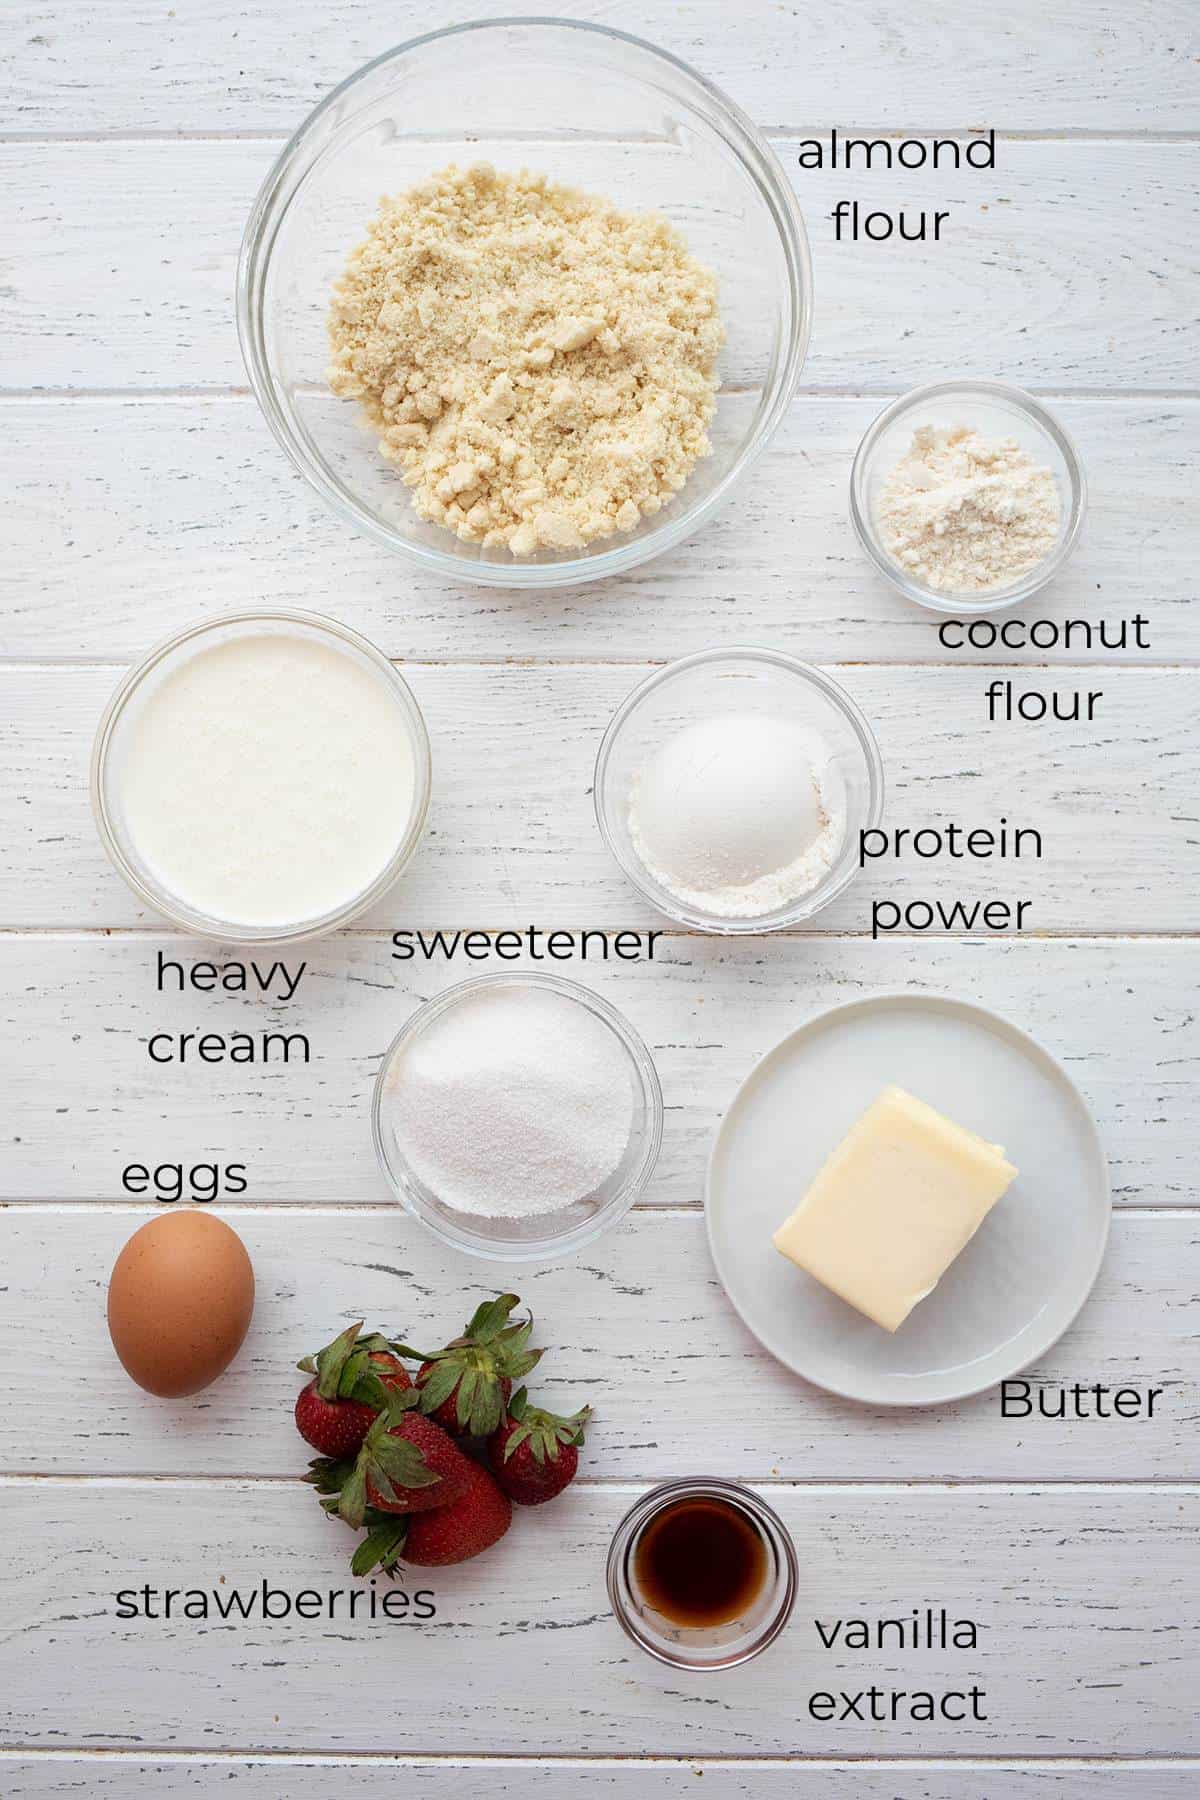 Top down image of ingredients for Keto Strawberry Shortcake.